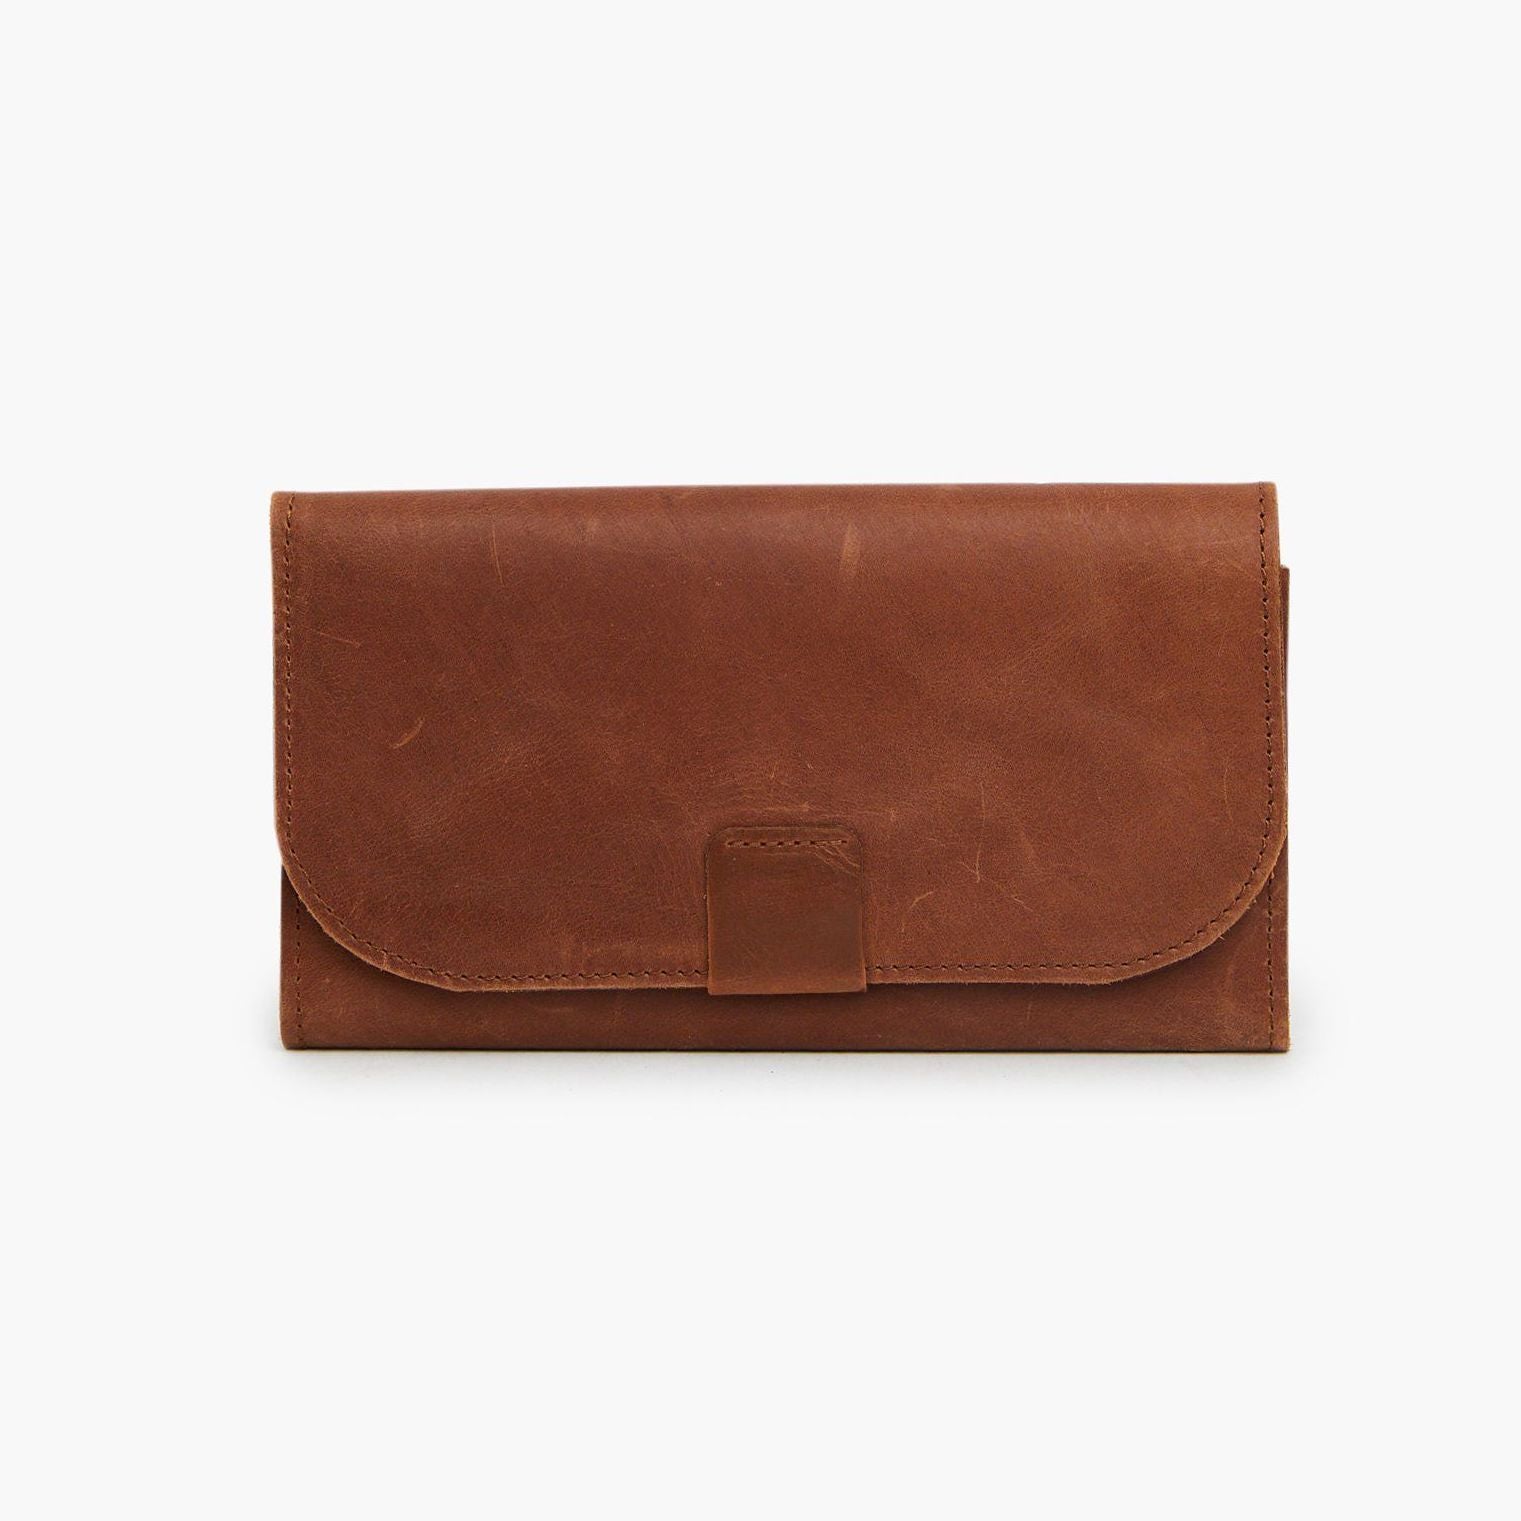 ABLE Kene Wallet whiskey leather